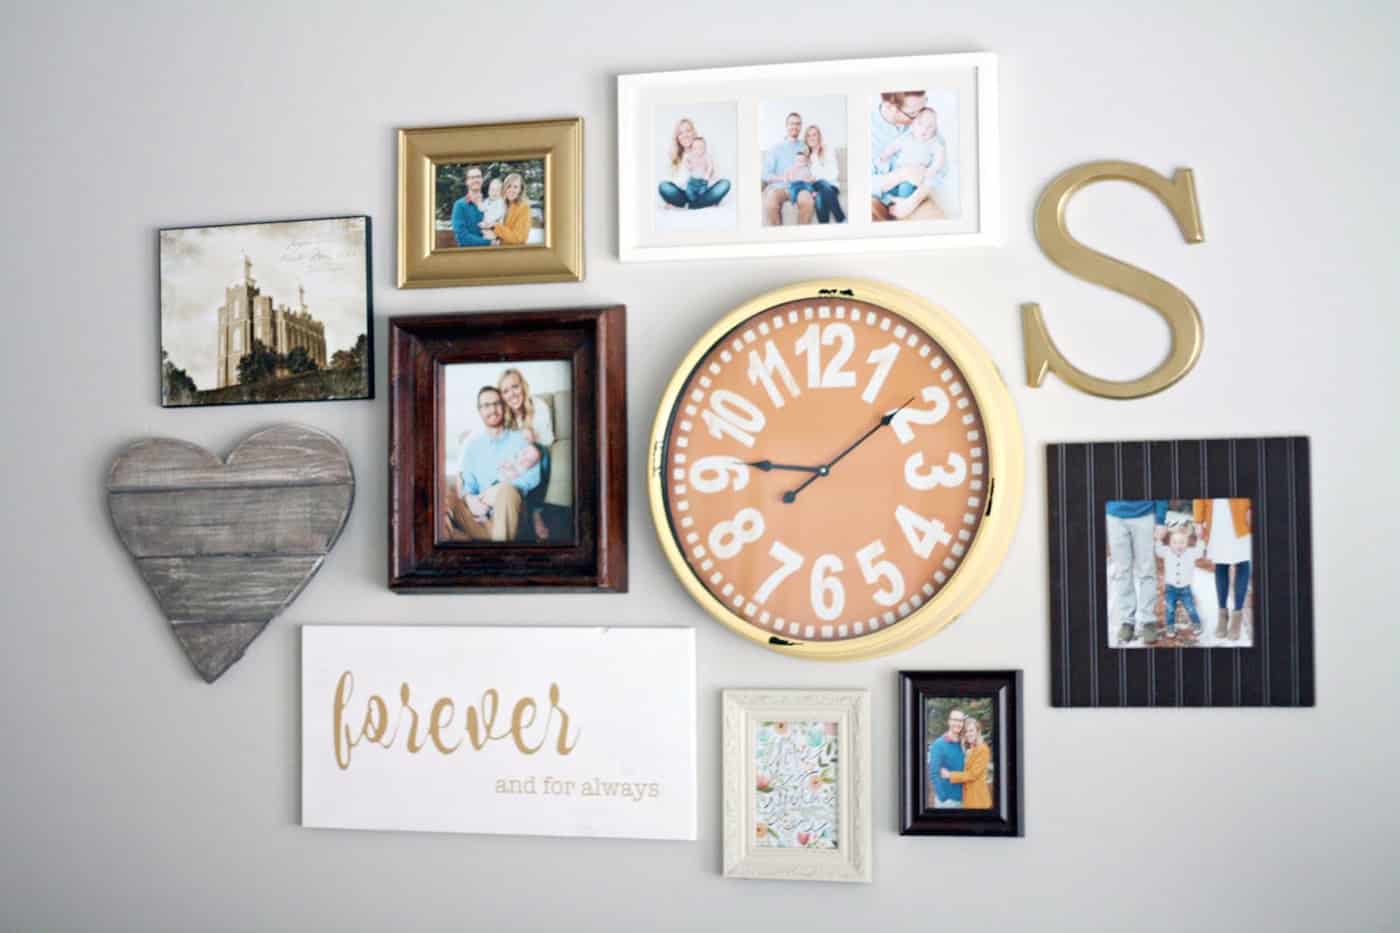 Add this easy "forever and always" wall art decor piece to an existing gallery wall - it's simple yet makes a big statement! Customize in any color.